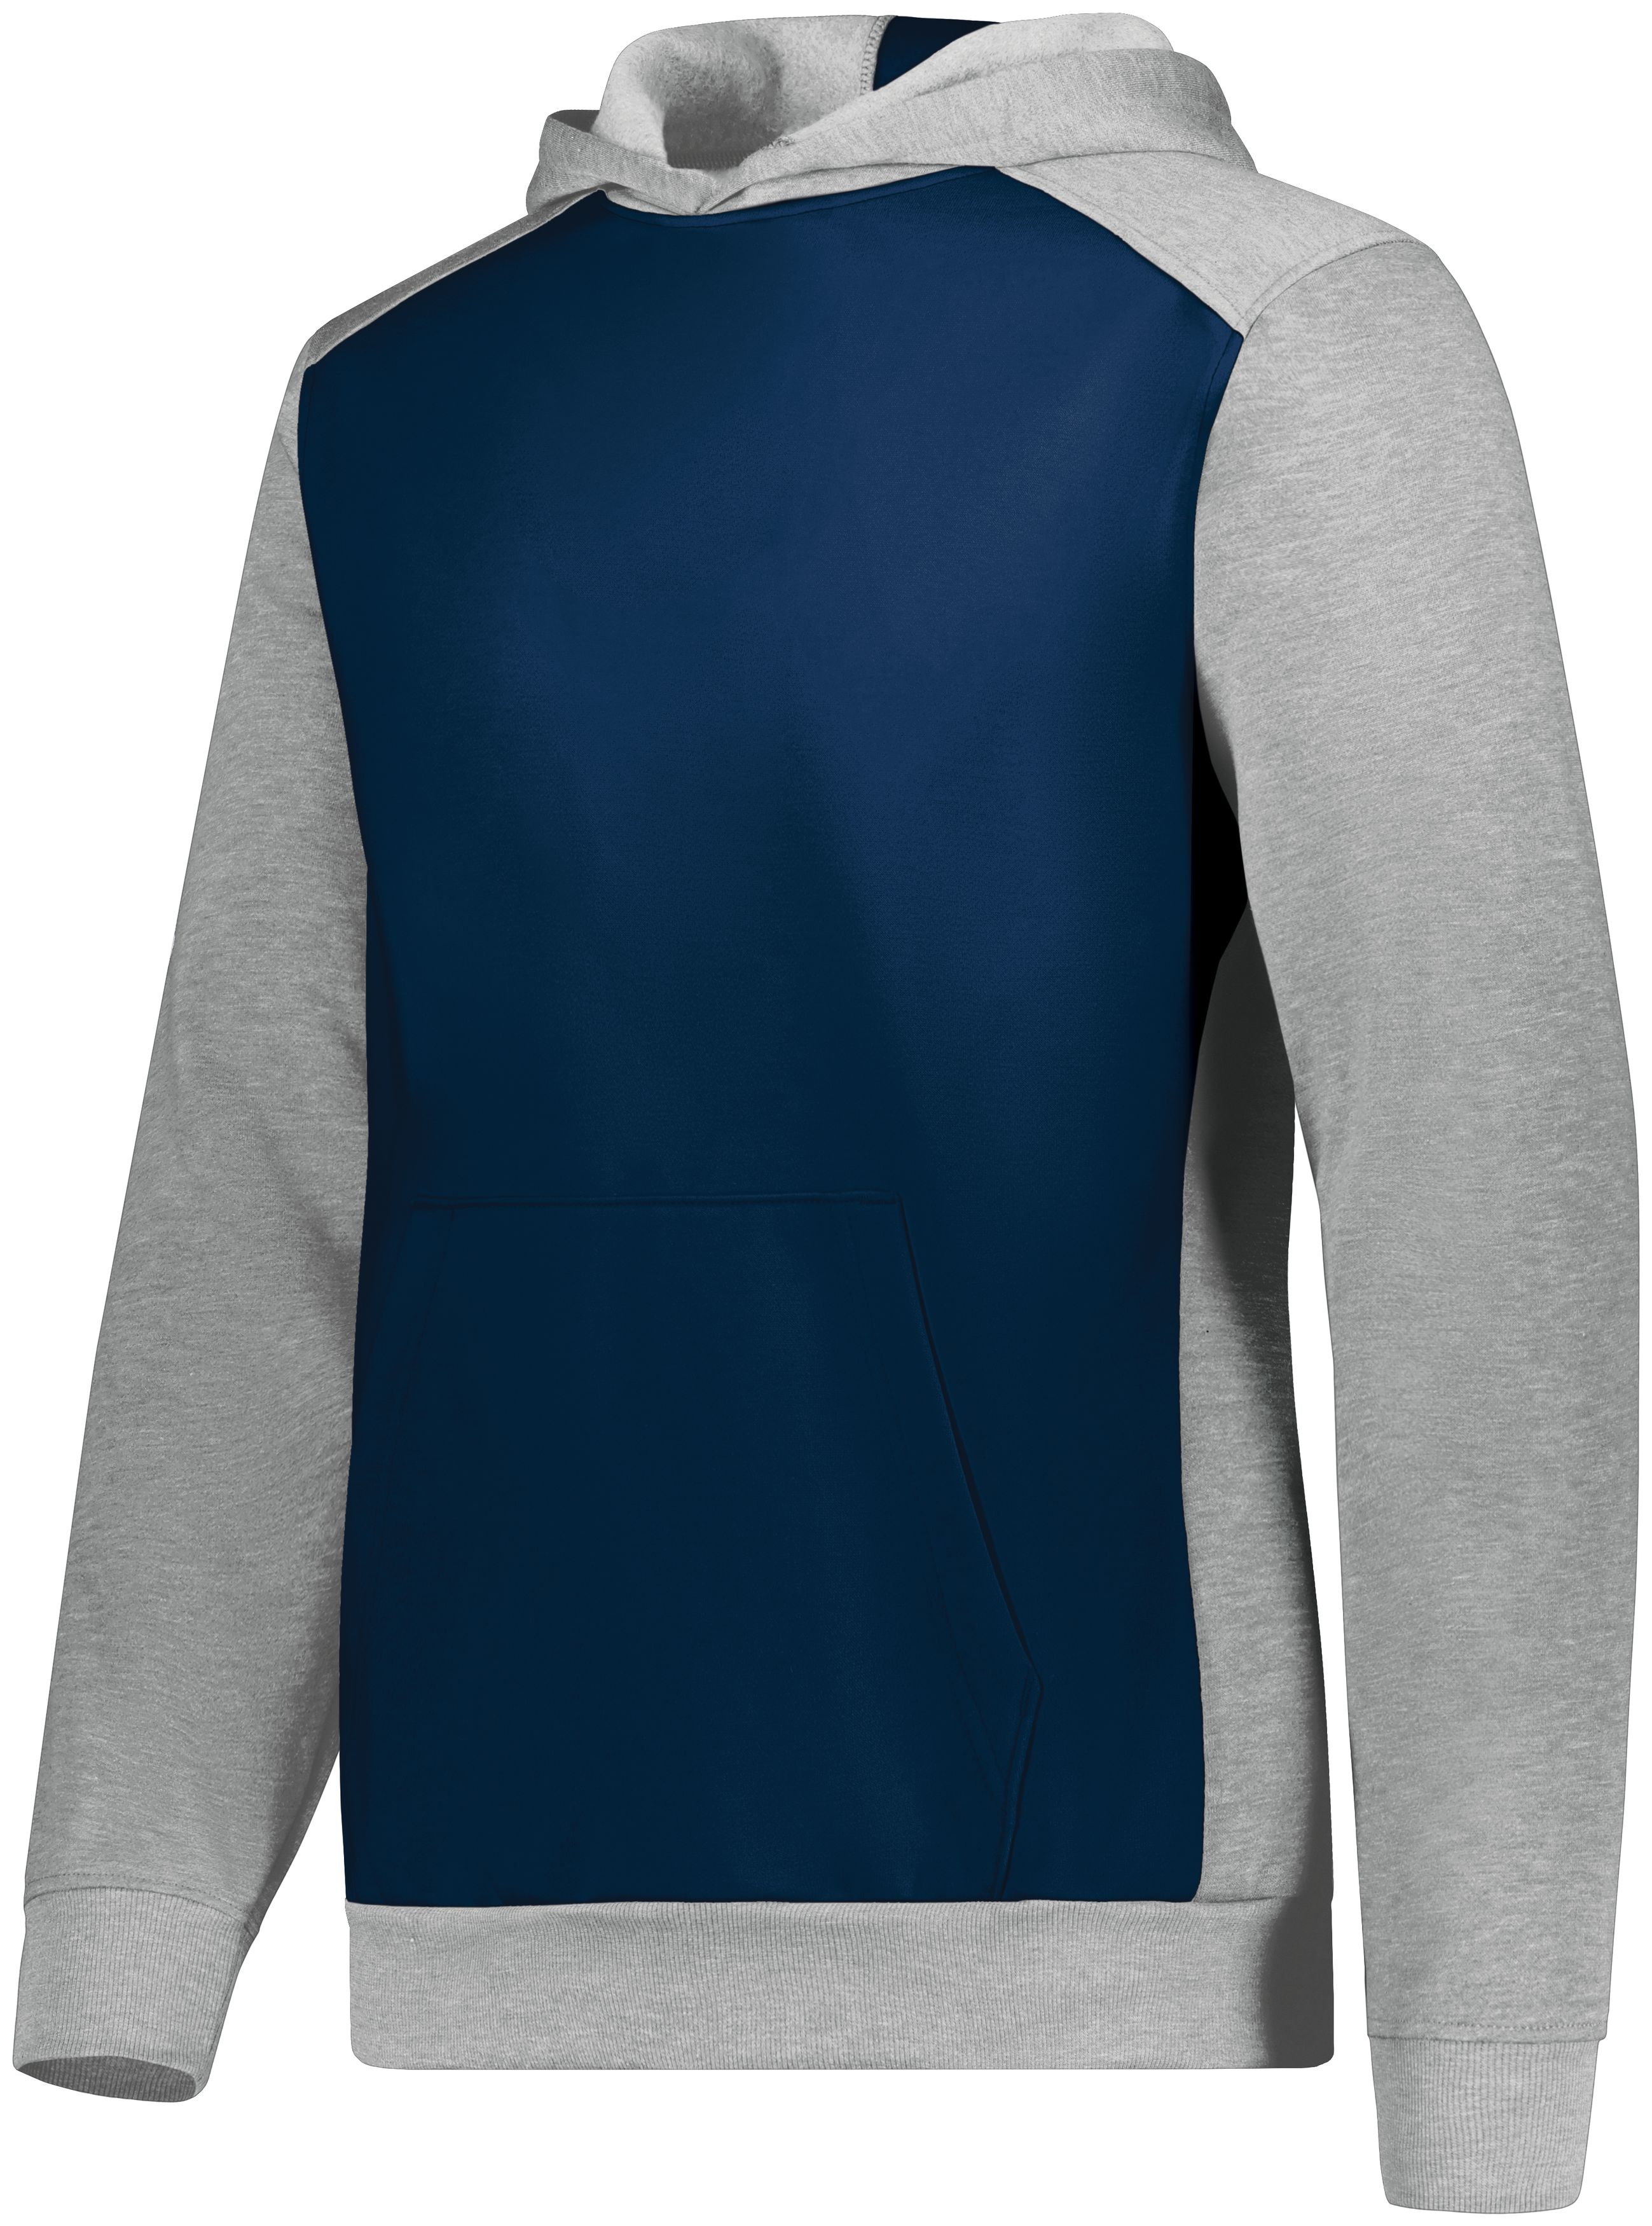 click to view Navy/Grey Heather